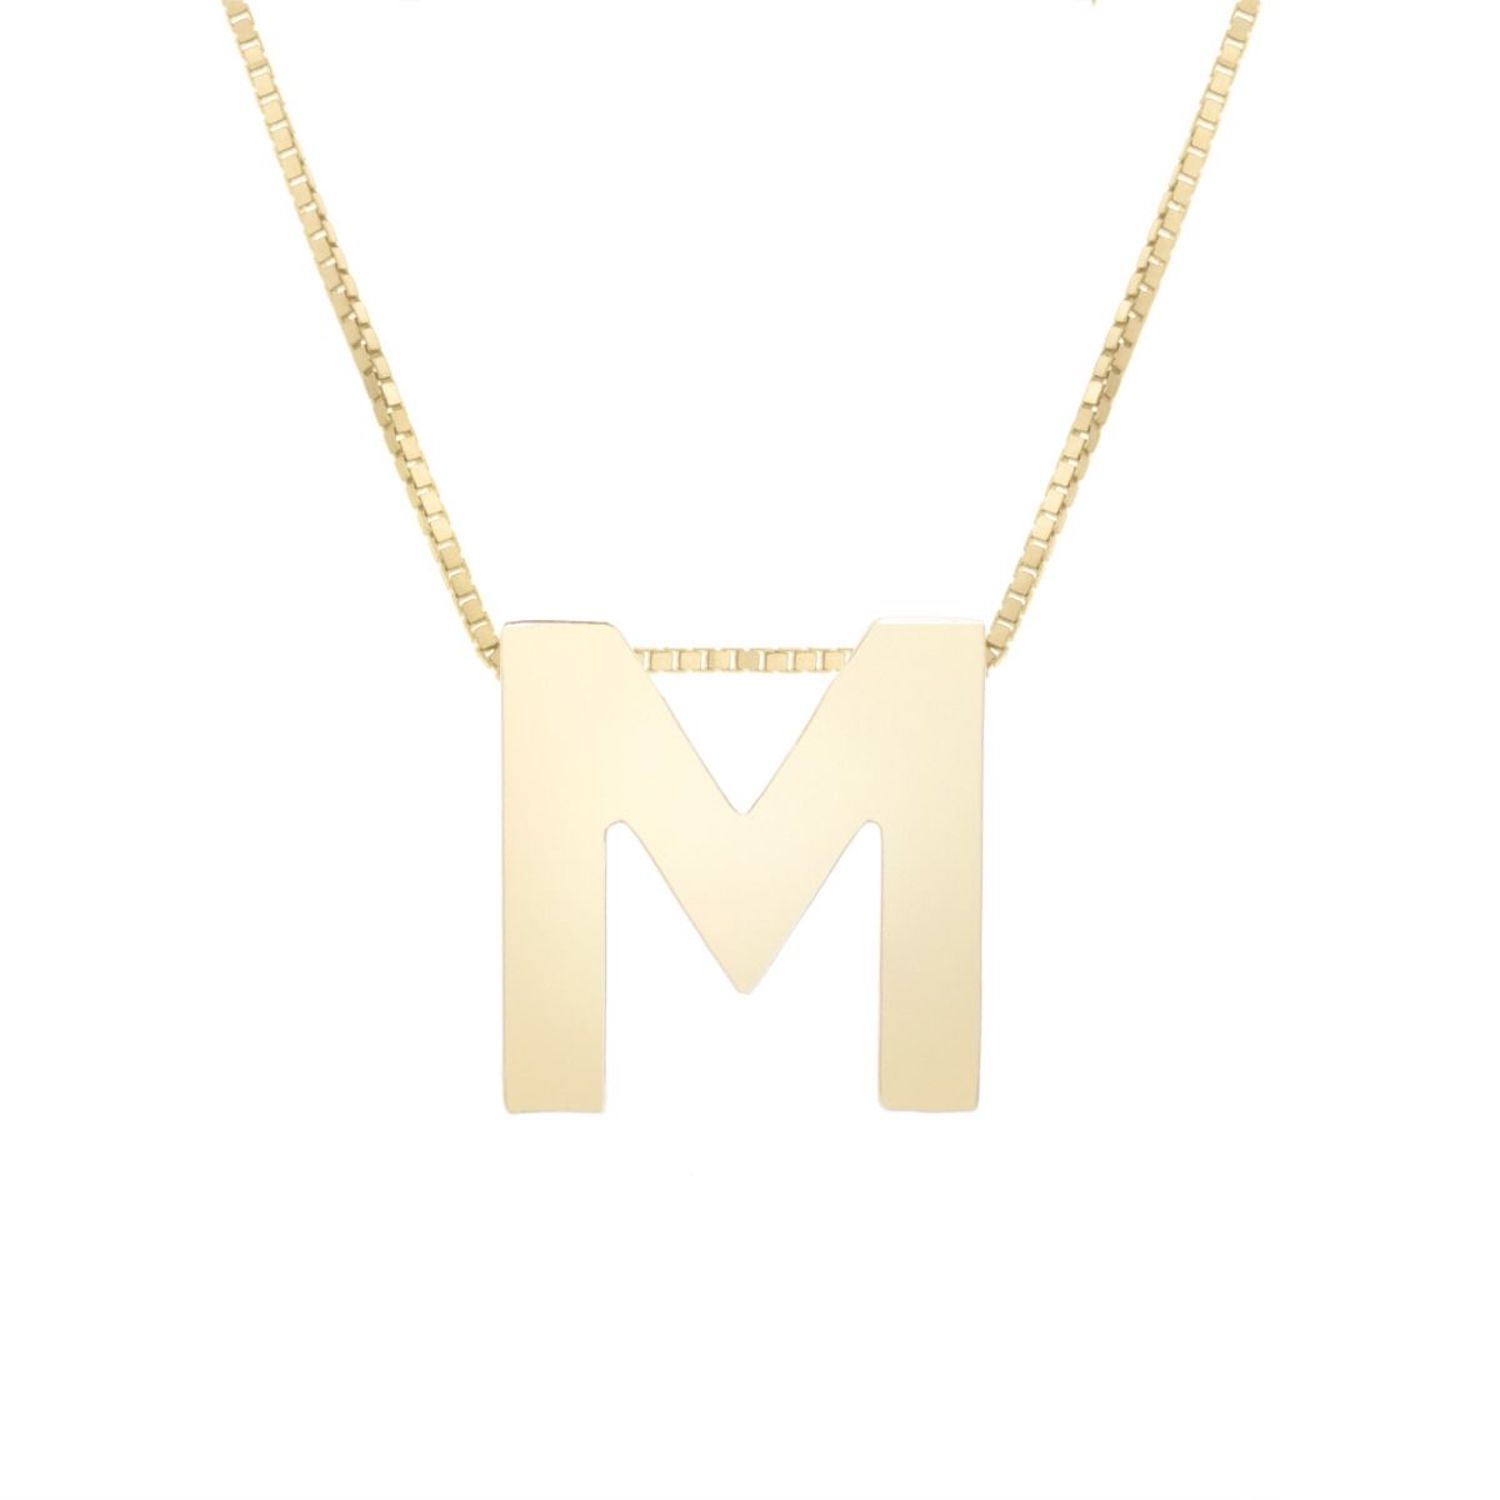 14K Yellow Gold Block Letter Initial Pendant Box Chain Necklace 16"-18" - M